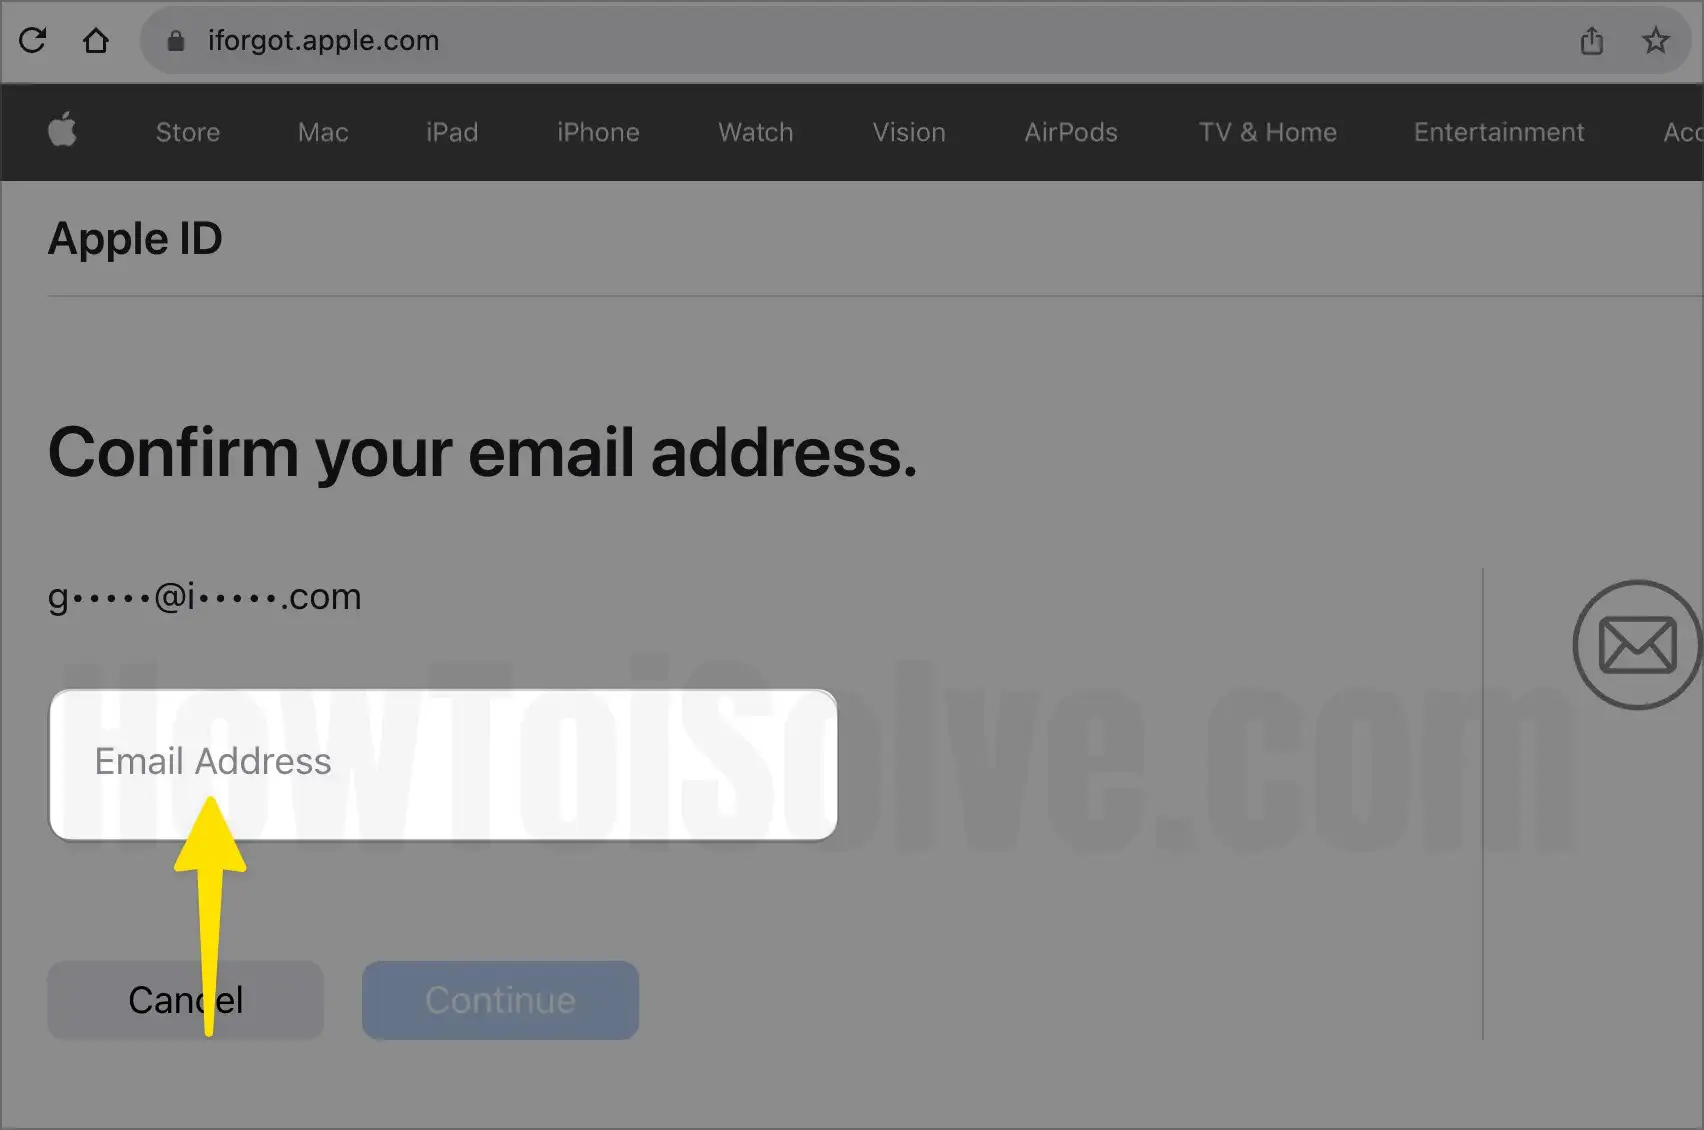 Enter your email address on mac